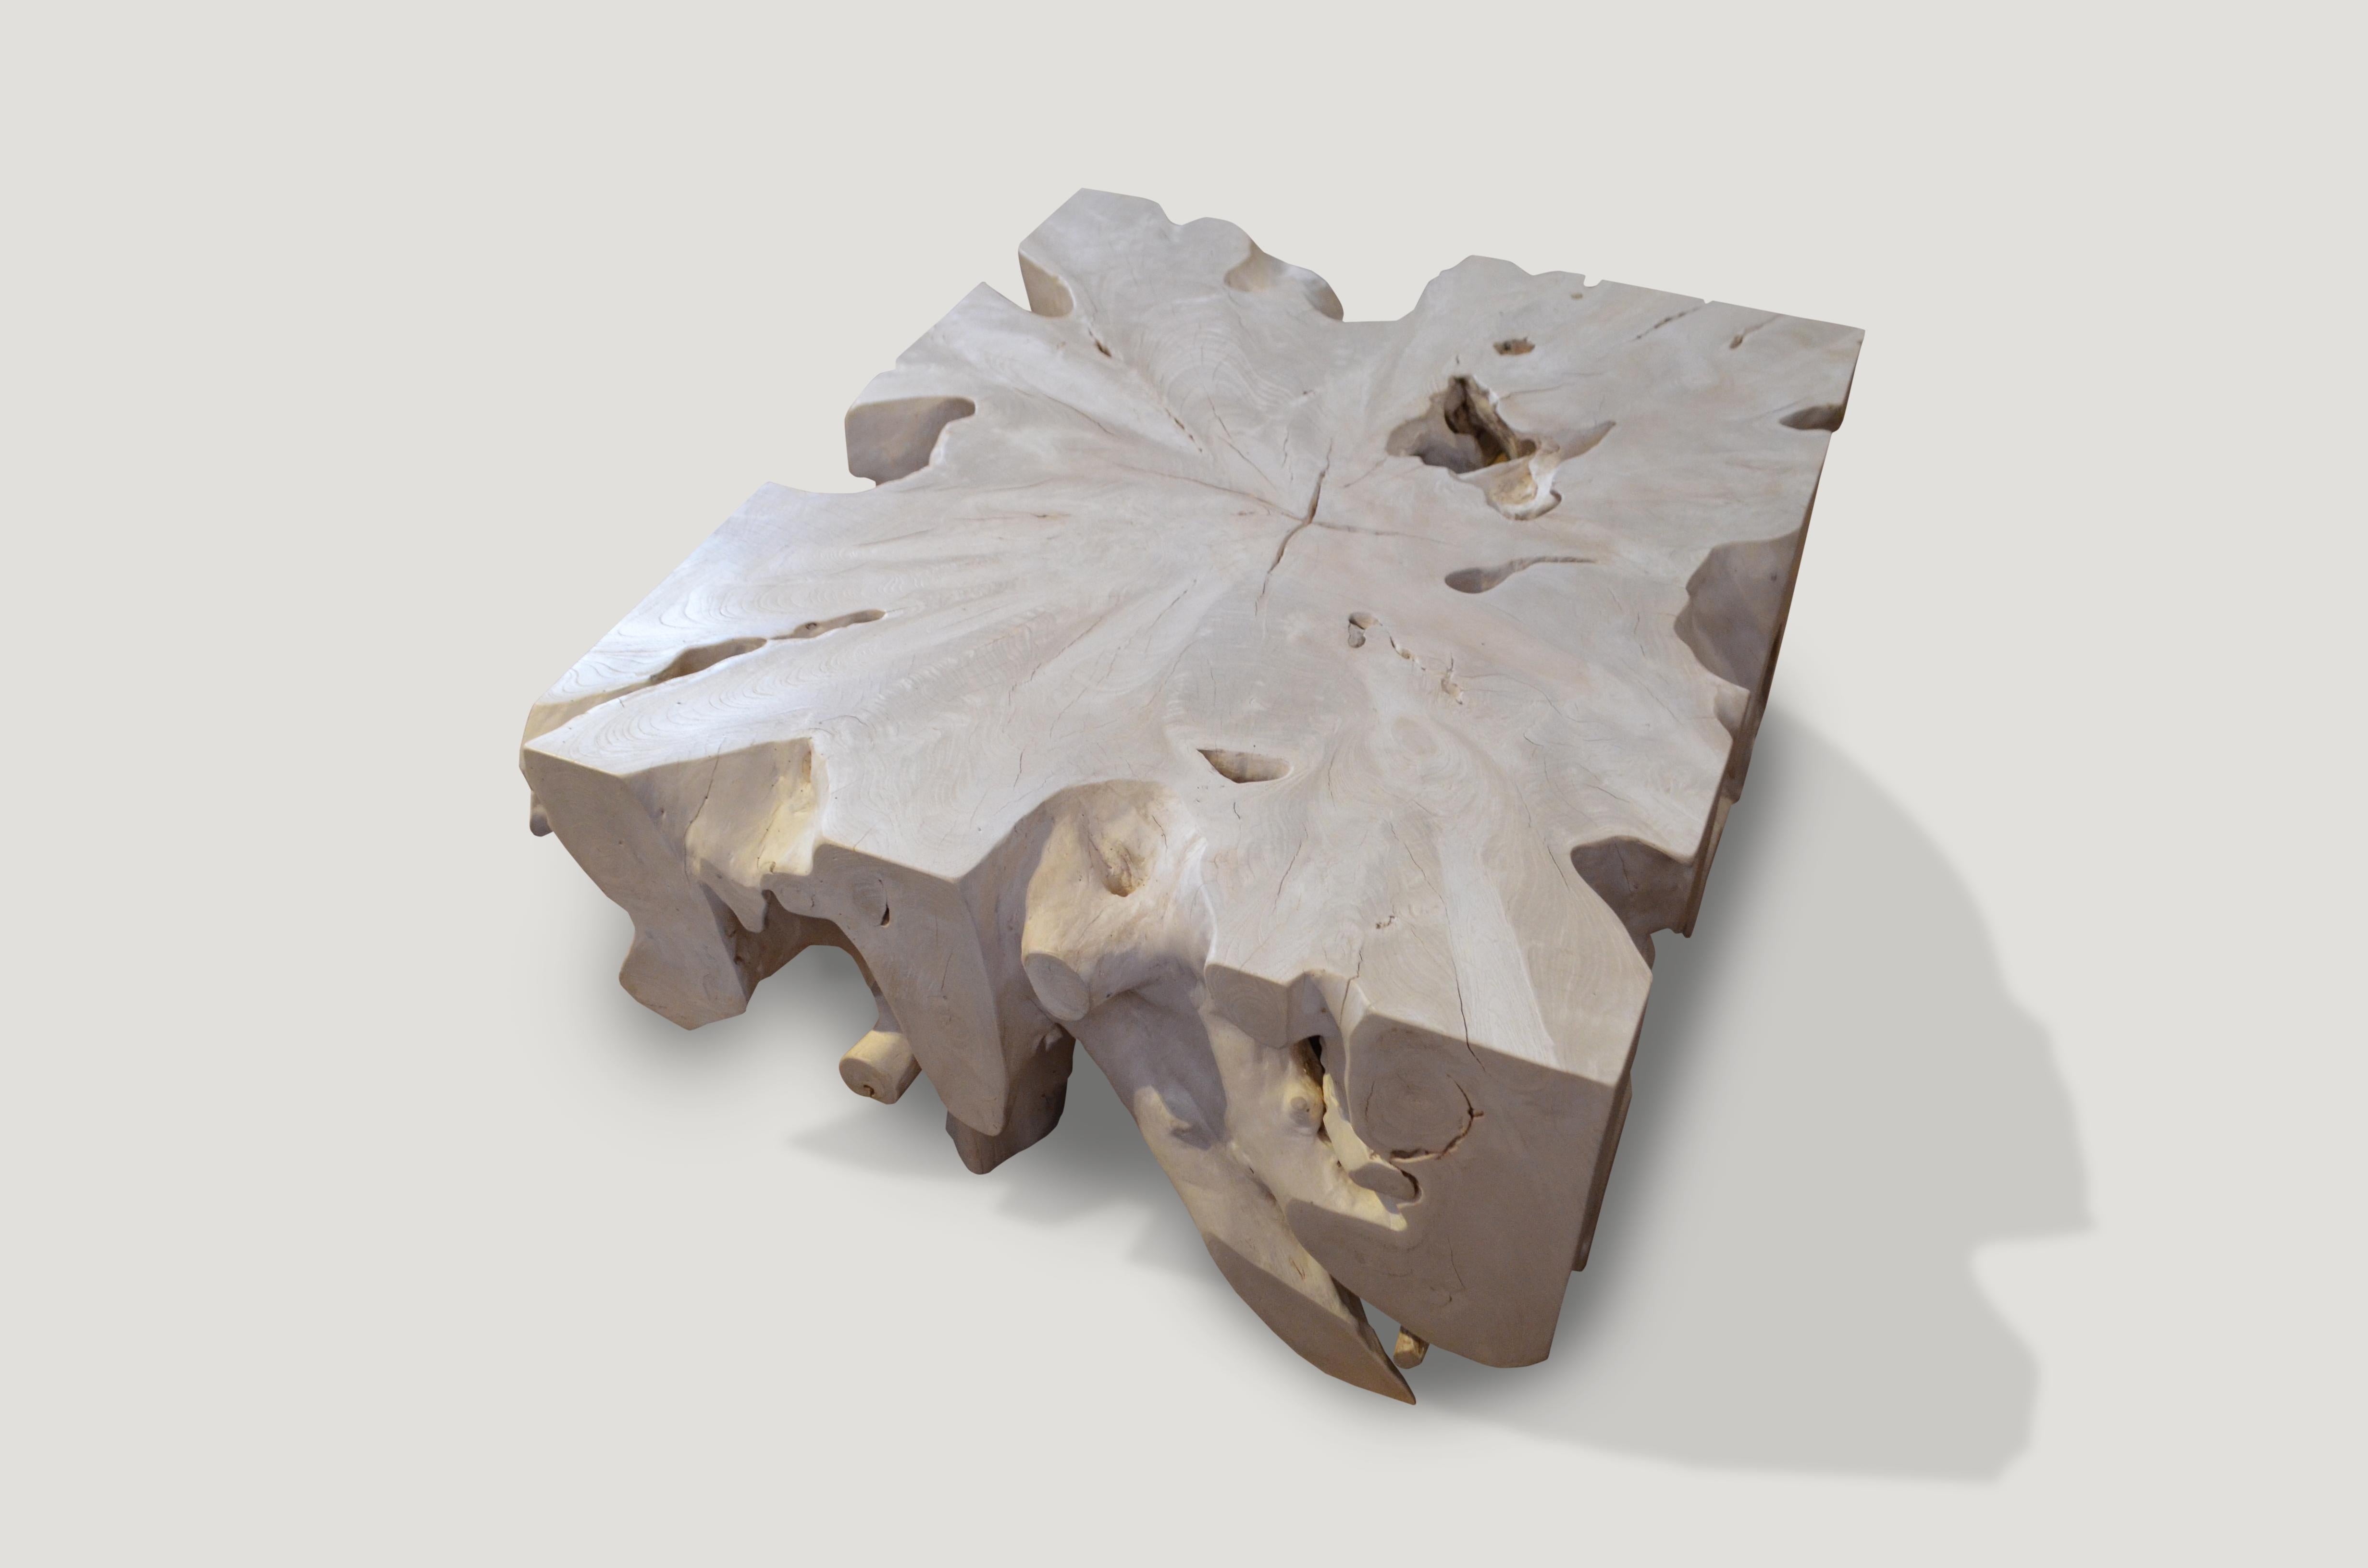 Single root coffee table hand-carved in to this usable shape.

The St. Barts collection features an exciting new line of organic white wash and natural weathered teak furniture. The reclaimed teak is left to bake in the sun and sea salt air for over